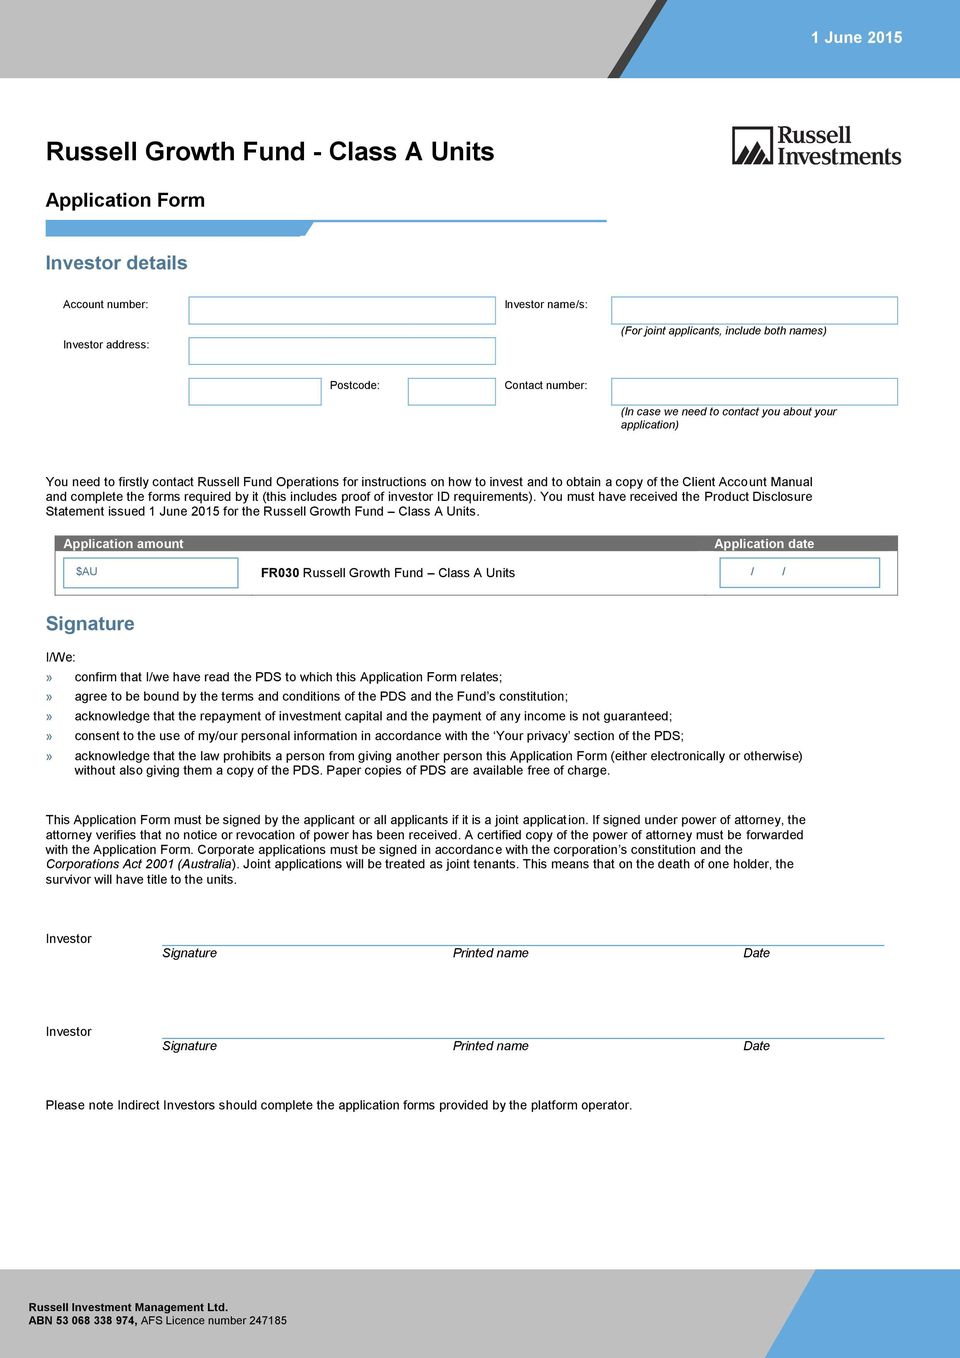 and complete the forms required by it (this includes proof of investor ID requirements).